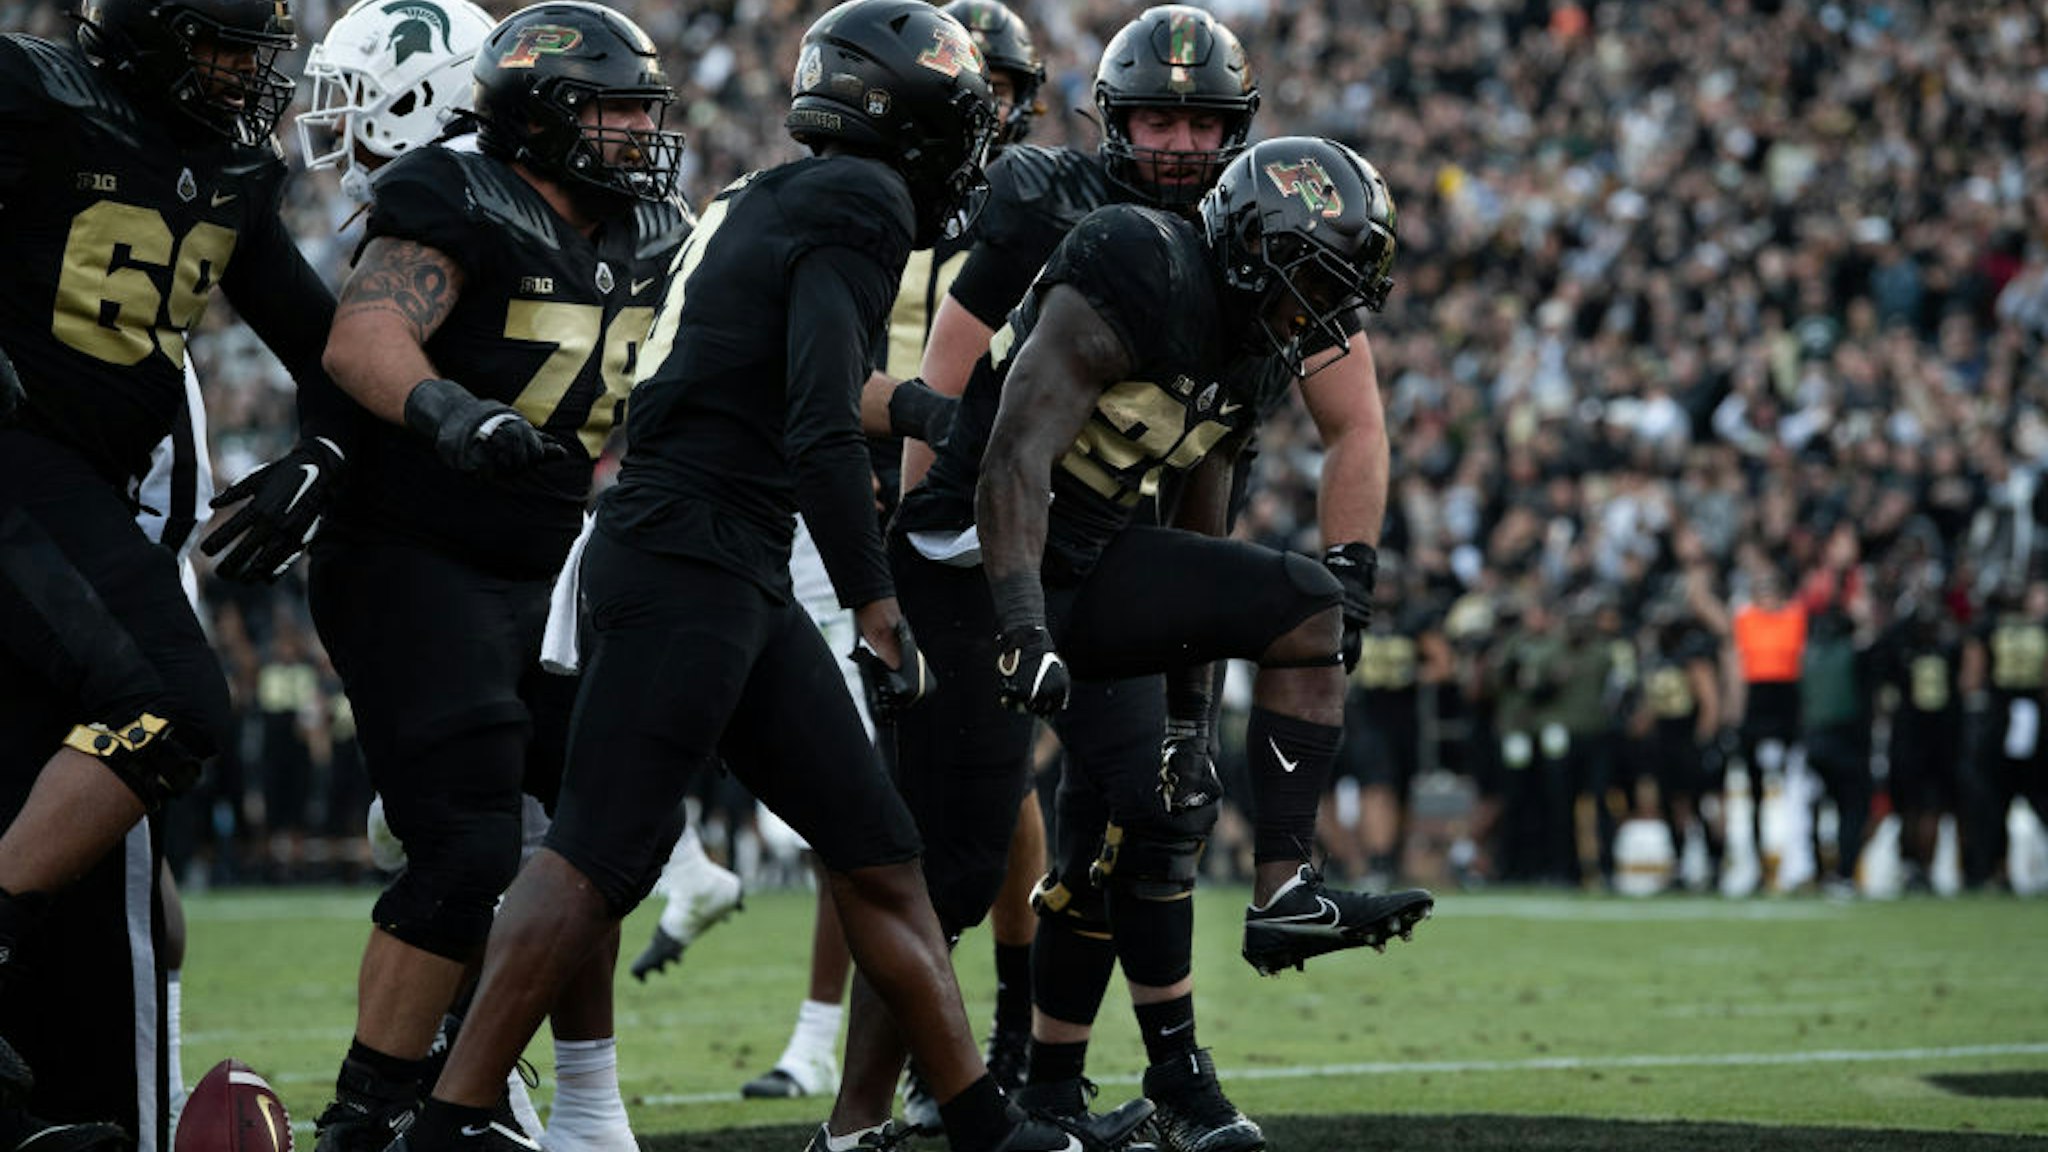 WEST LAFAYETTE, IN - NOVEMBER 06: Purdue Boilermakers running back King Doerue (22) celebrates a touchdown run during the college football game between the Purdue Boilermakers and Michigan State Spartans on November 6, 2021, at Ross-Ade Stadium in West Lafayette, IN. (Photo by Zach Bolinger/Icon Sportswire via Getty Images)